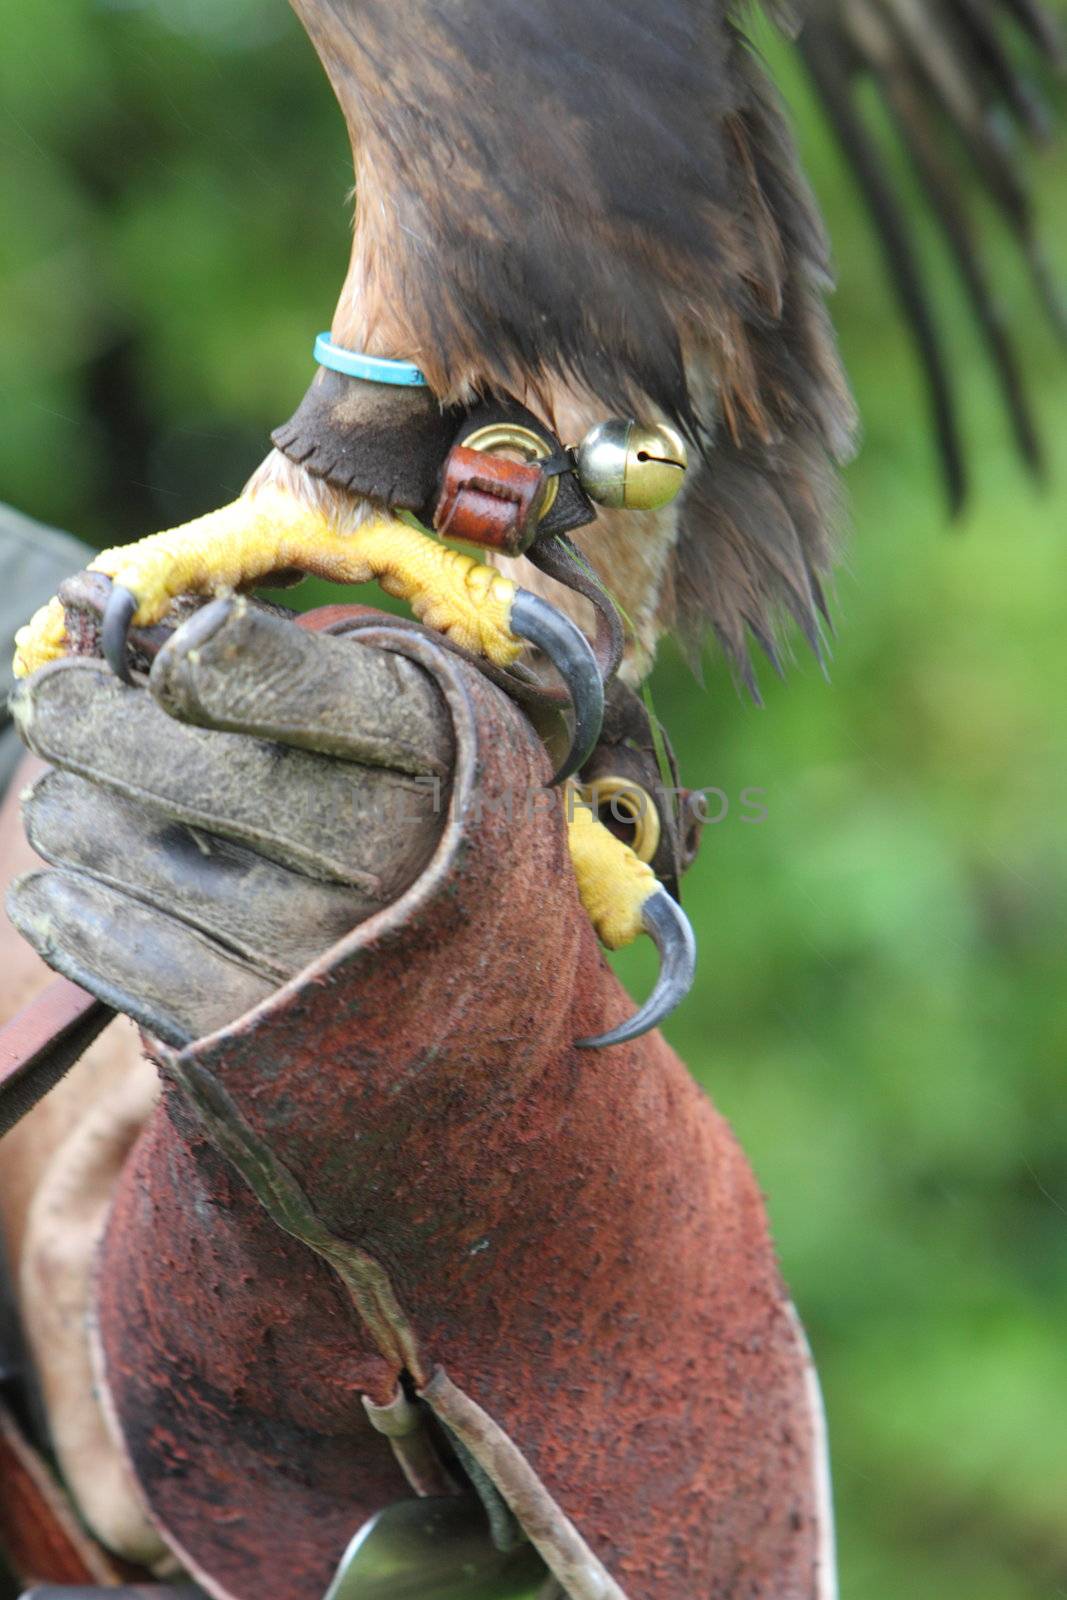 Golden eagle talons and falconers glove